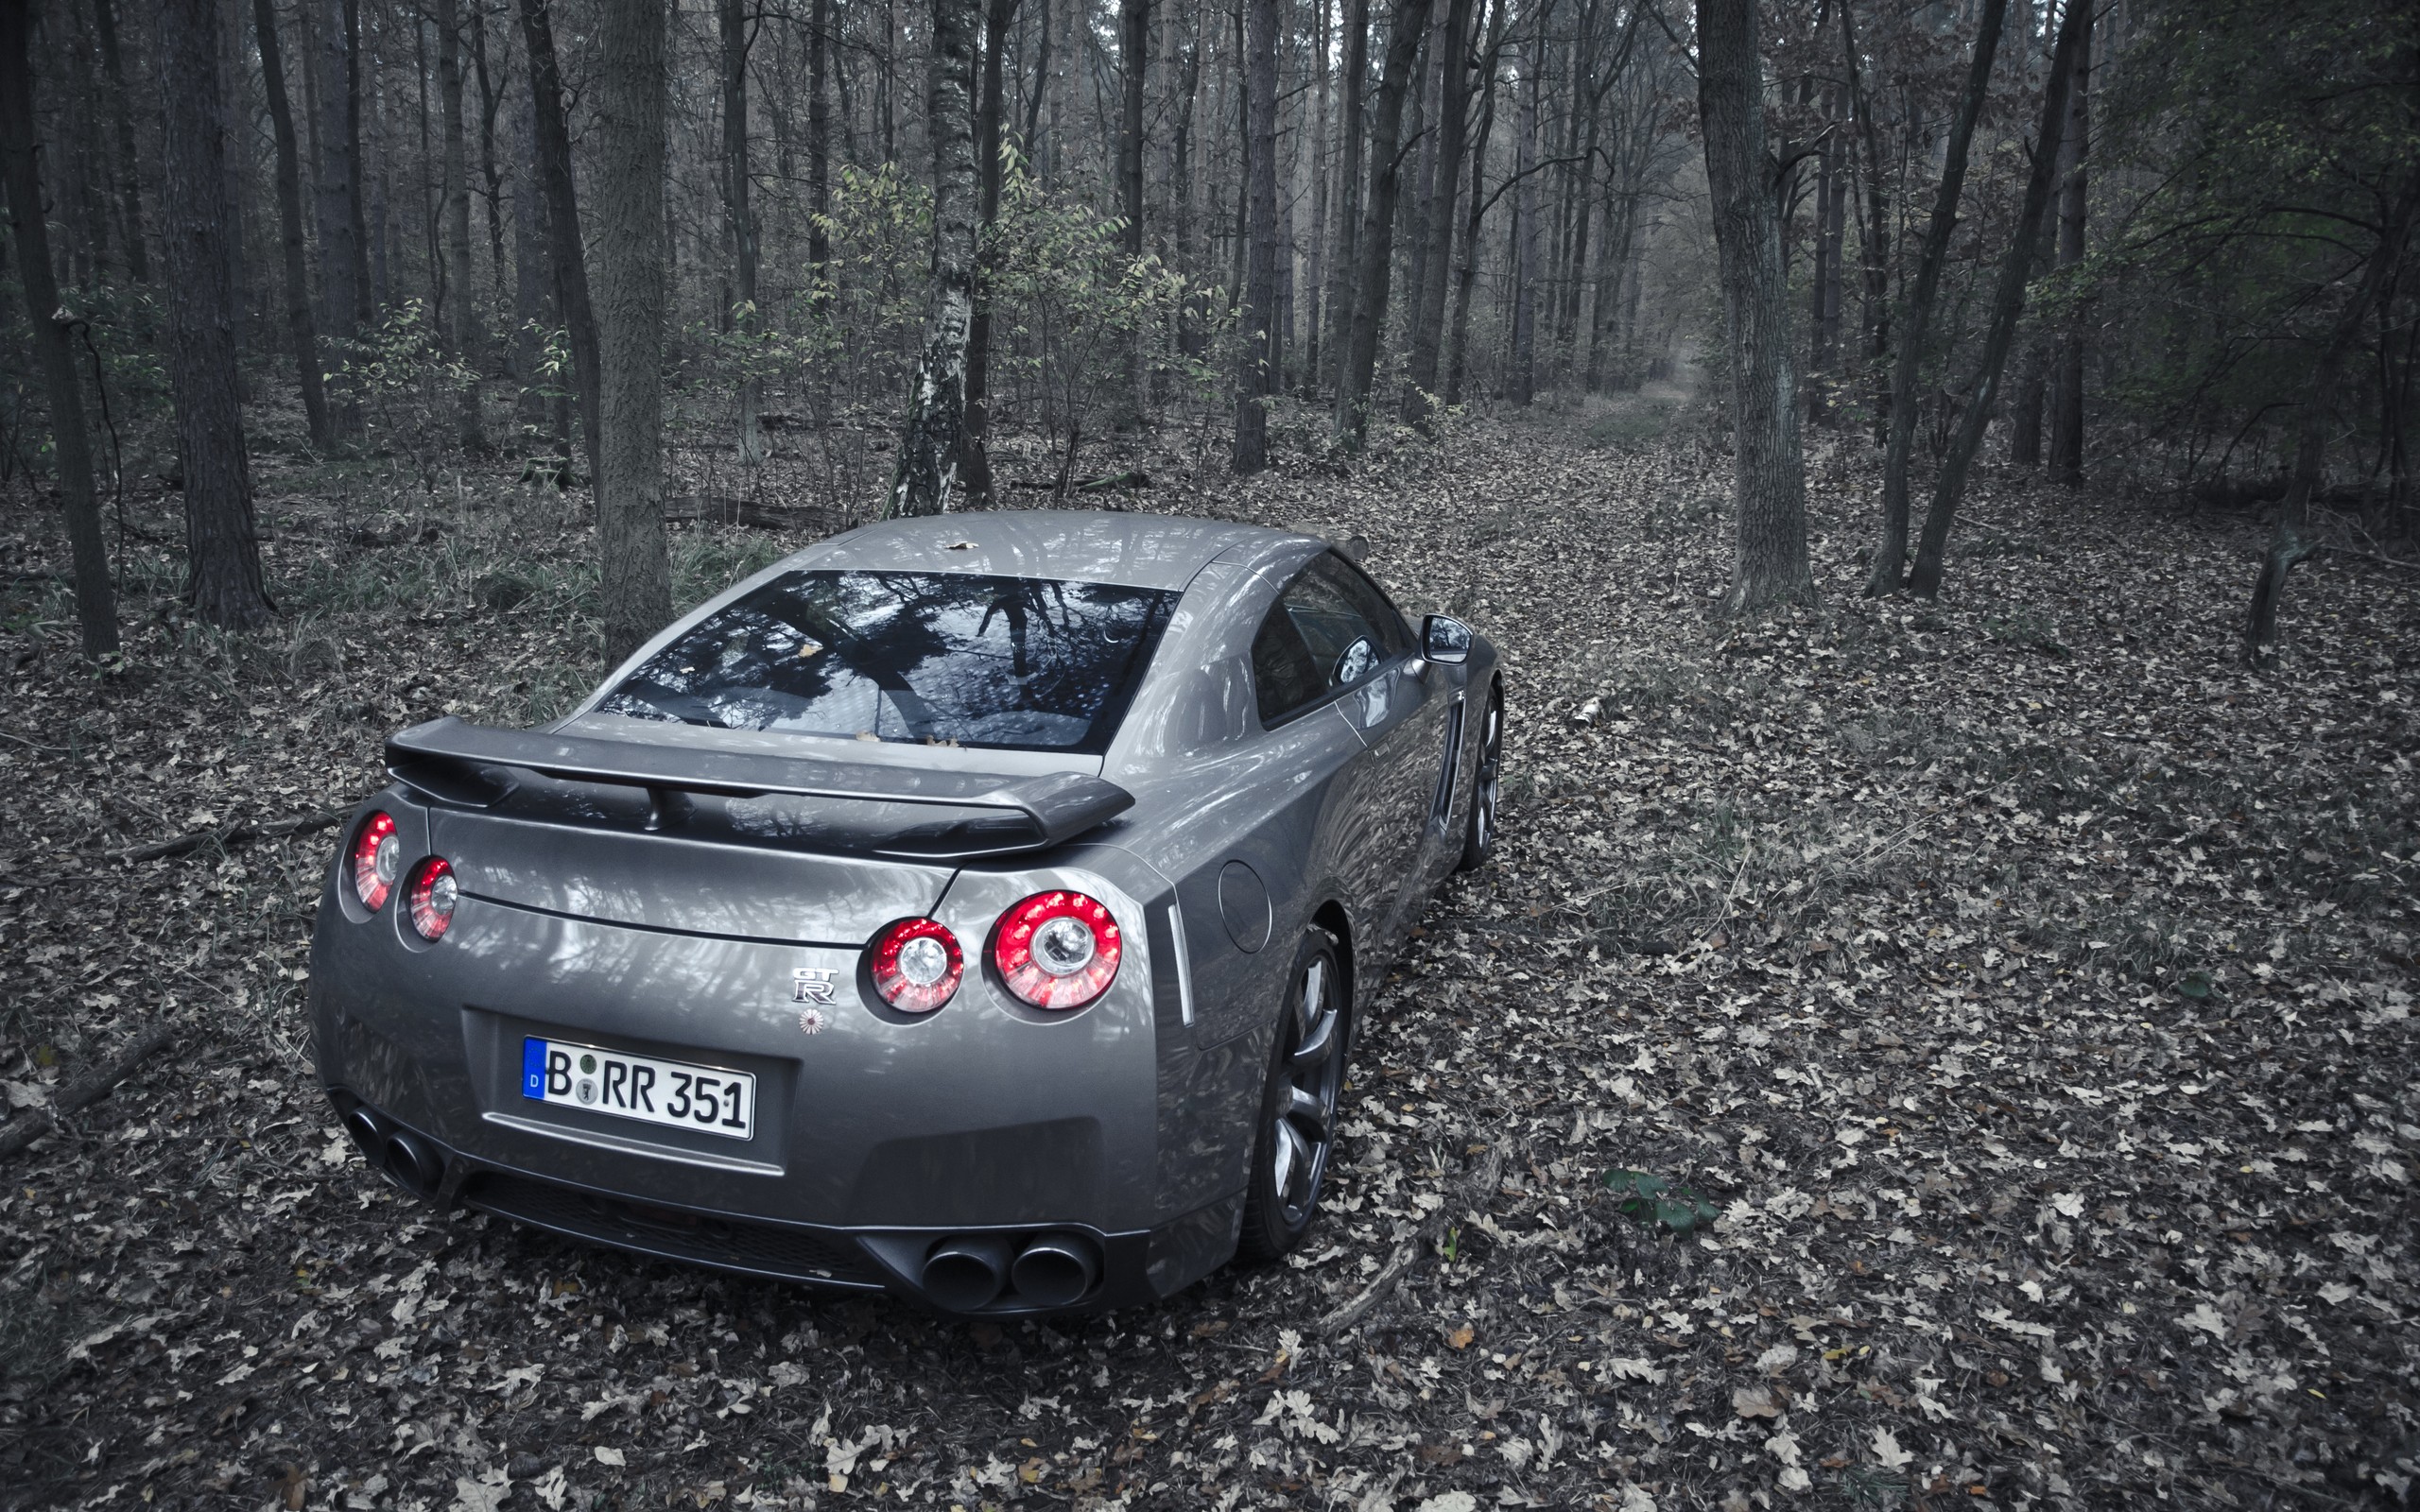 nature, Forest, Cars, Outdoors, Nissan, Jdm, Nissan, Gt r, R35, Tailight Wallpaper